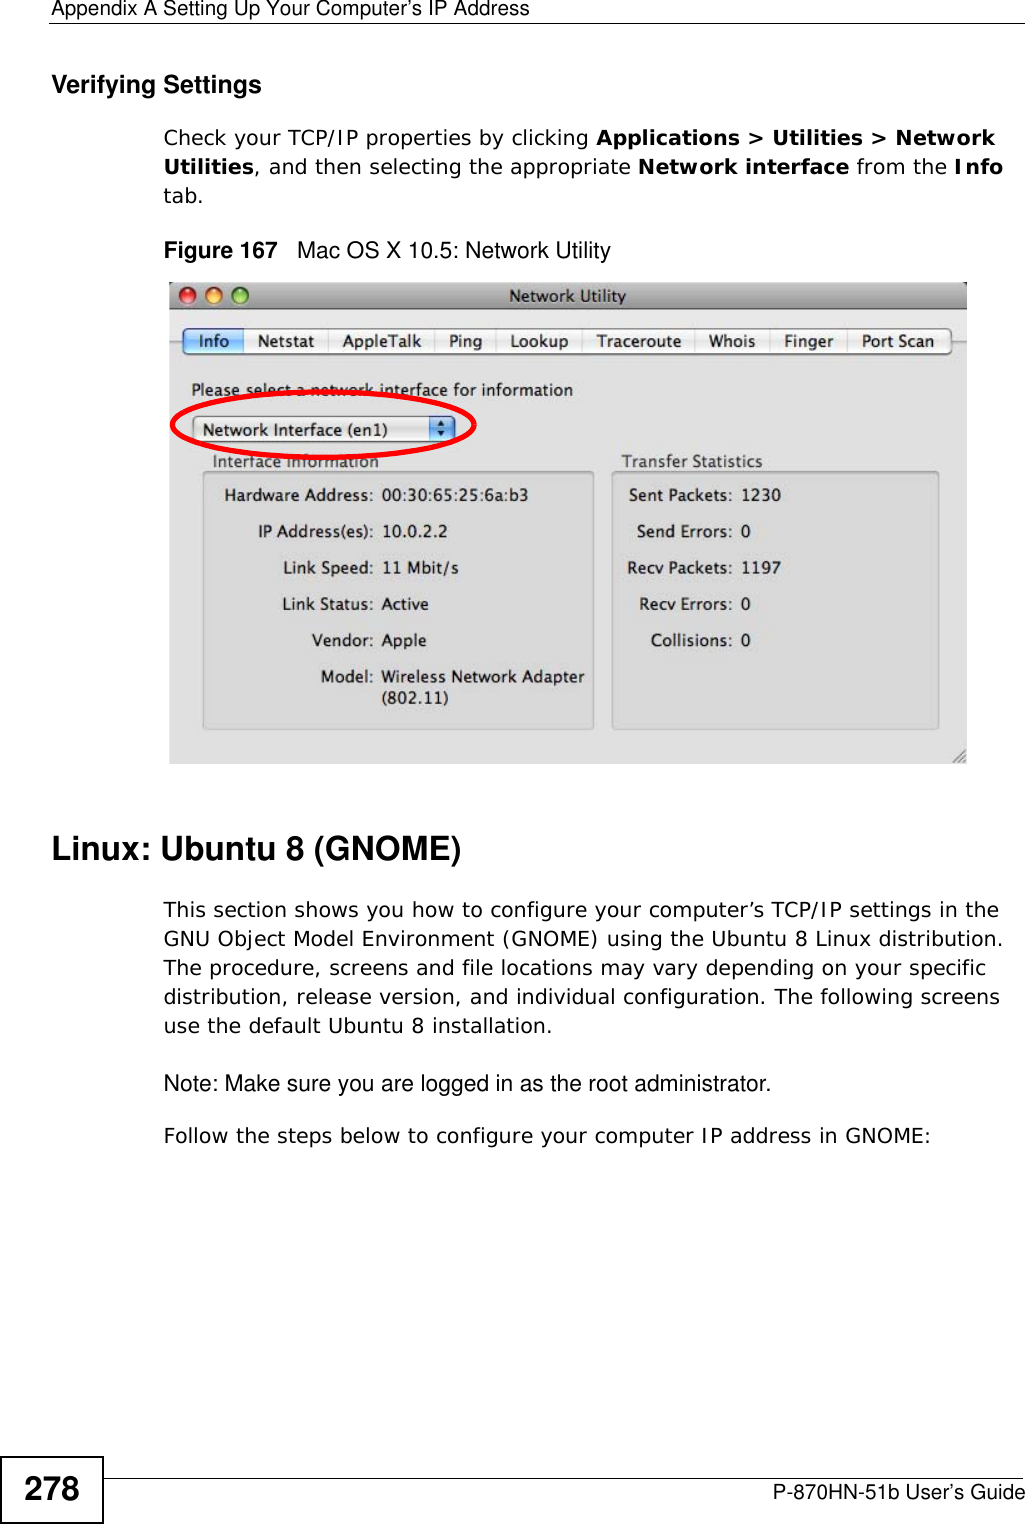 Appendix A Setting Up Your Computer’s IP AddressP-870HN-51b User’s Guide278Verifying SettingsCheck your TCP/IP properties by clicking Applications &gt; Utilities &gt; Network Utilities, and then selecting the appropriate Network interface from the Info tab.Figure 167   Mac OS X 10.5: Network UtilityLinux: Ubuntu 8 (GNOME)This section shows you how to configure your computer’s TCP/IP settings in the GNU Object Model Environment (GNOME) using the Ubuntu 8 Linux distribution. The procedure, screens and file locations may vary depending on your specific distribution, release version, and individual configuration. The following screens use the default Ubuntu 8 installation.Note: Make sure you are logged in as the root administrator. Follow the steps below to configure your computer IP address in GNOME: 